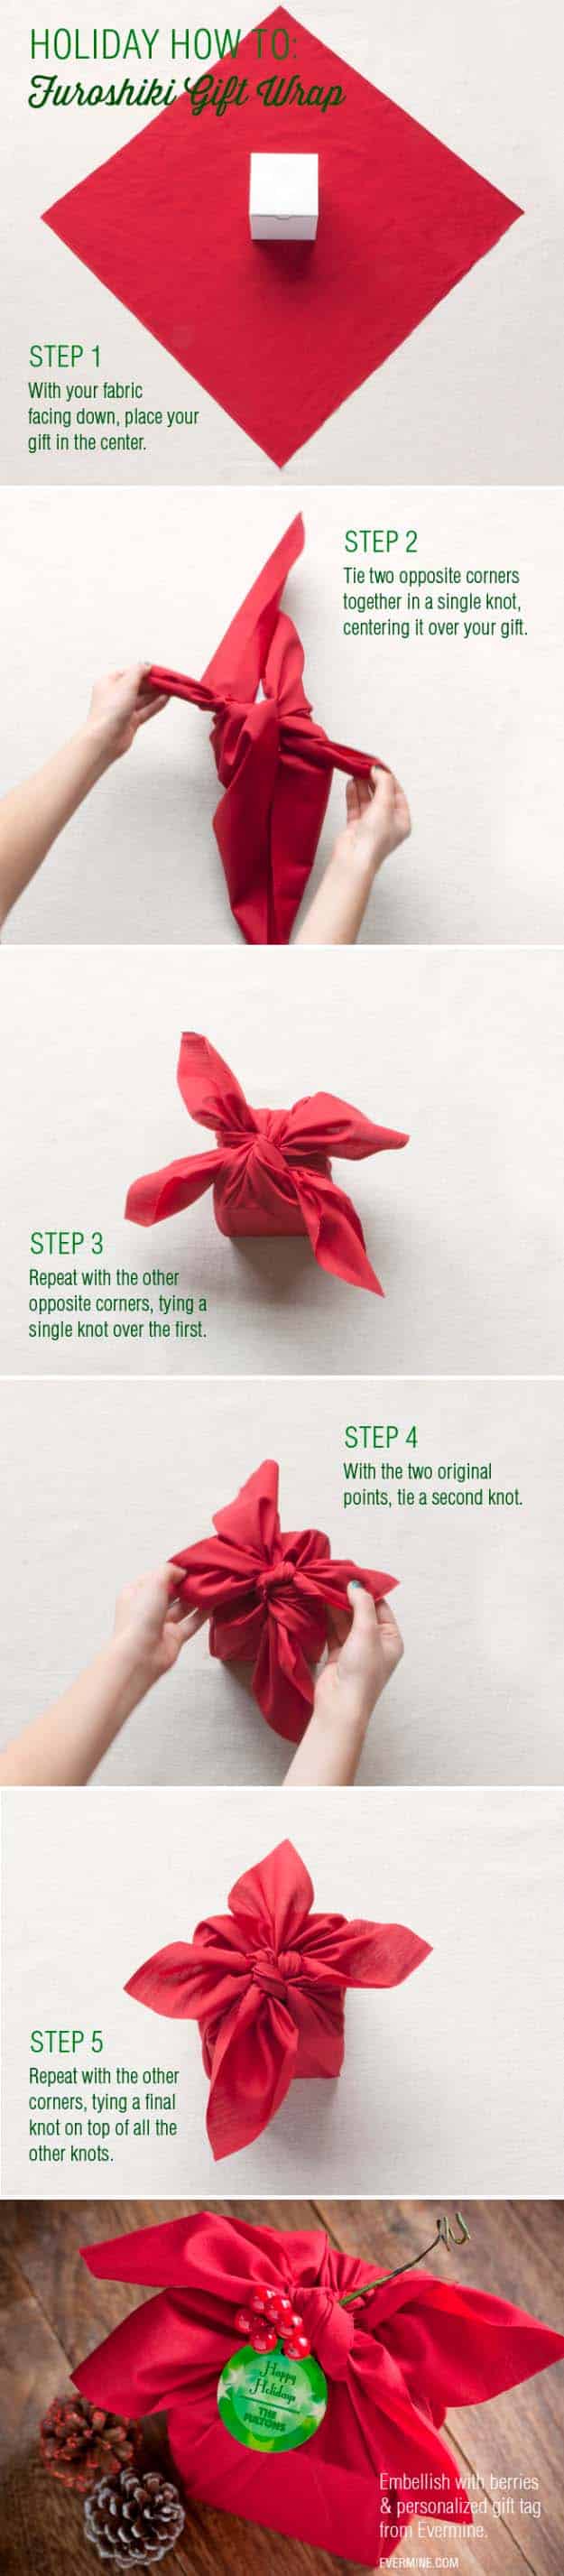 DIY Gift Wrapping Ideas - How To Wrap A Present - Tutorials, Cool Ideas and Instructions | Cute Gift Wrap Ideas for Christmas, Birthdays and Holidays | Tips for Bows and Creative Wrapping Papers | Furoshiki Gift Wrap #gifts #diys